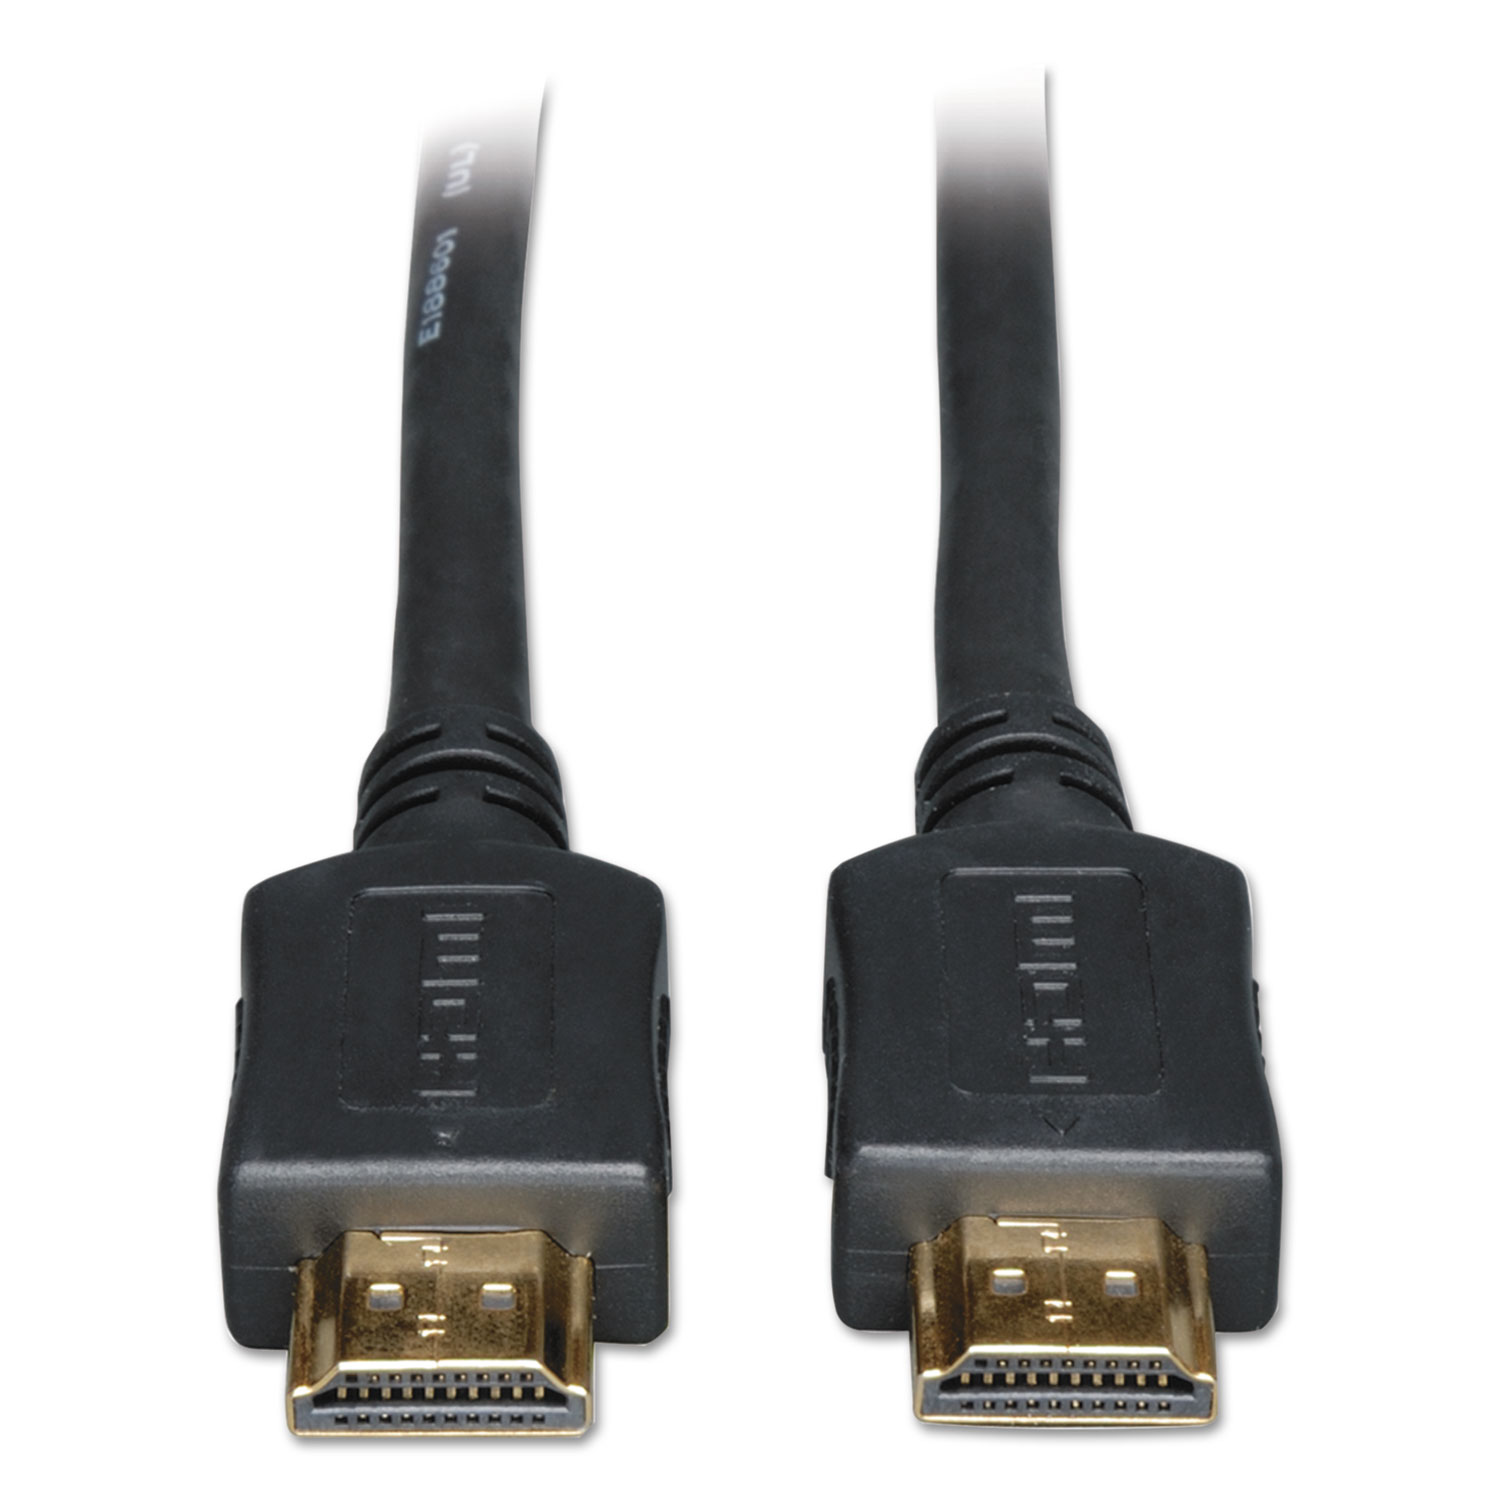 P568-006 6ft HDMI Gold Digital Video Cable HDMI M/M, 6